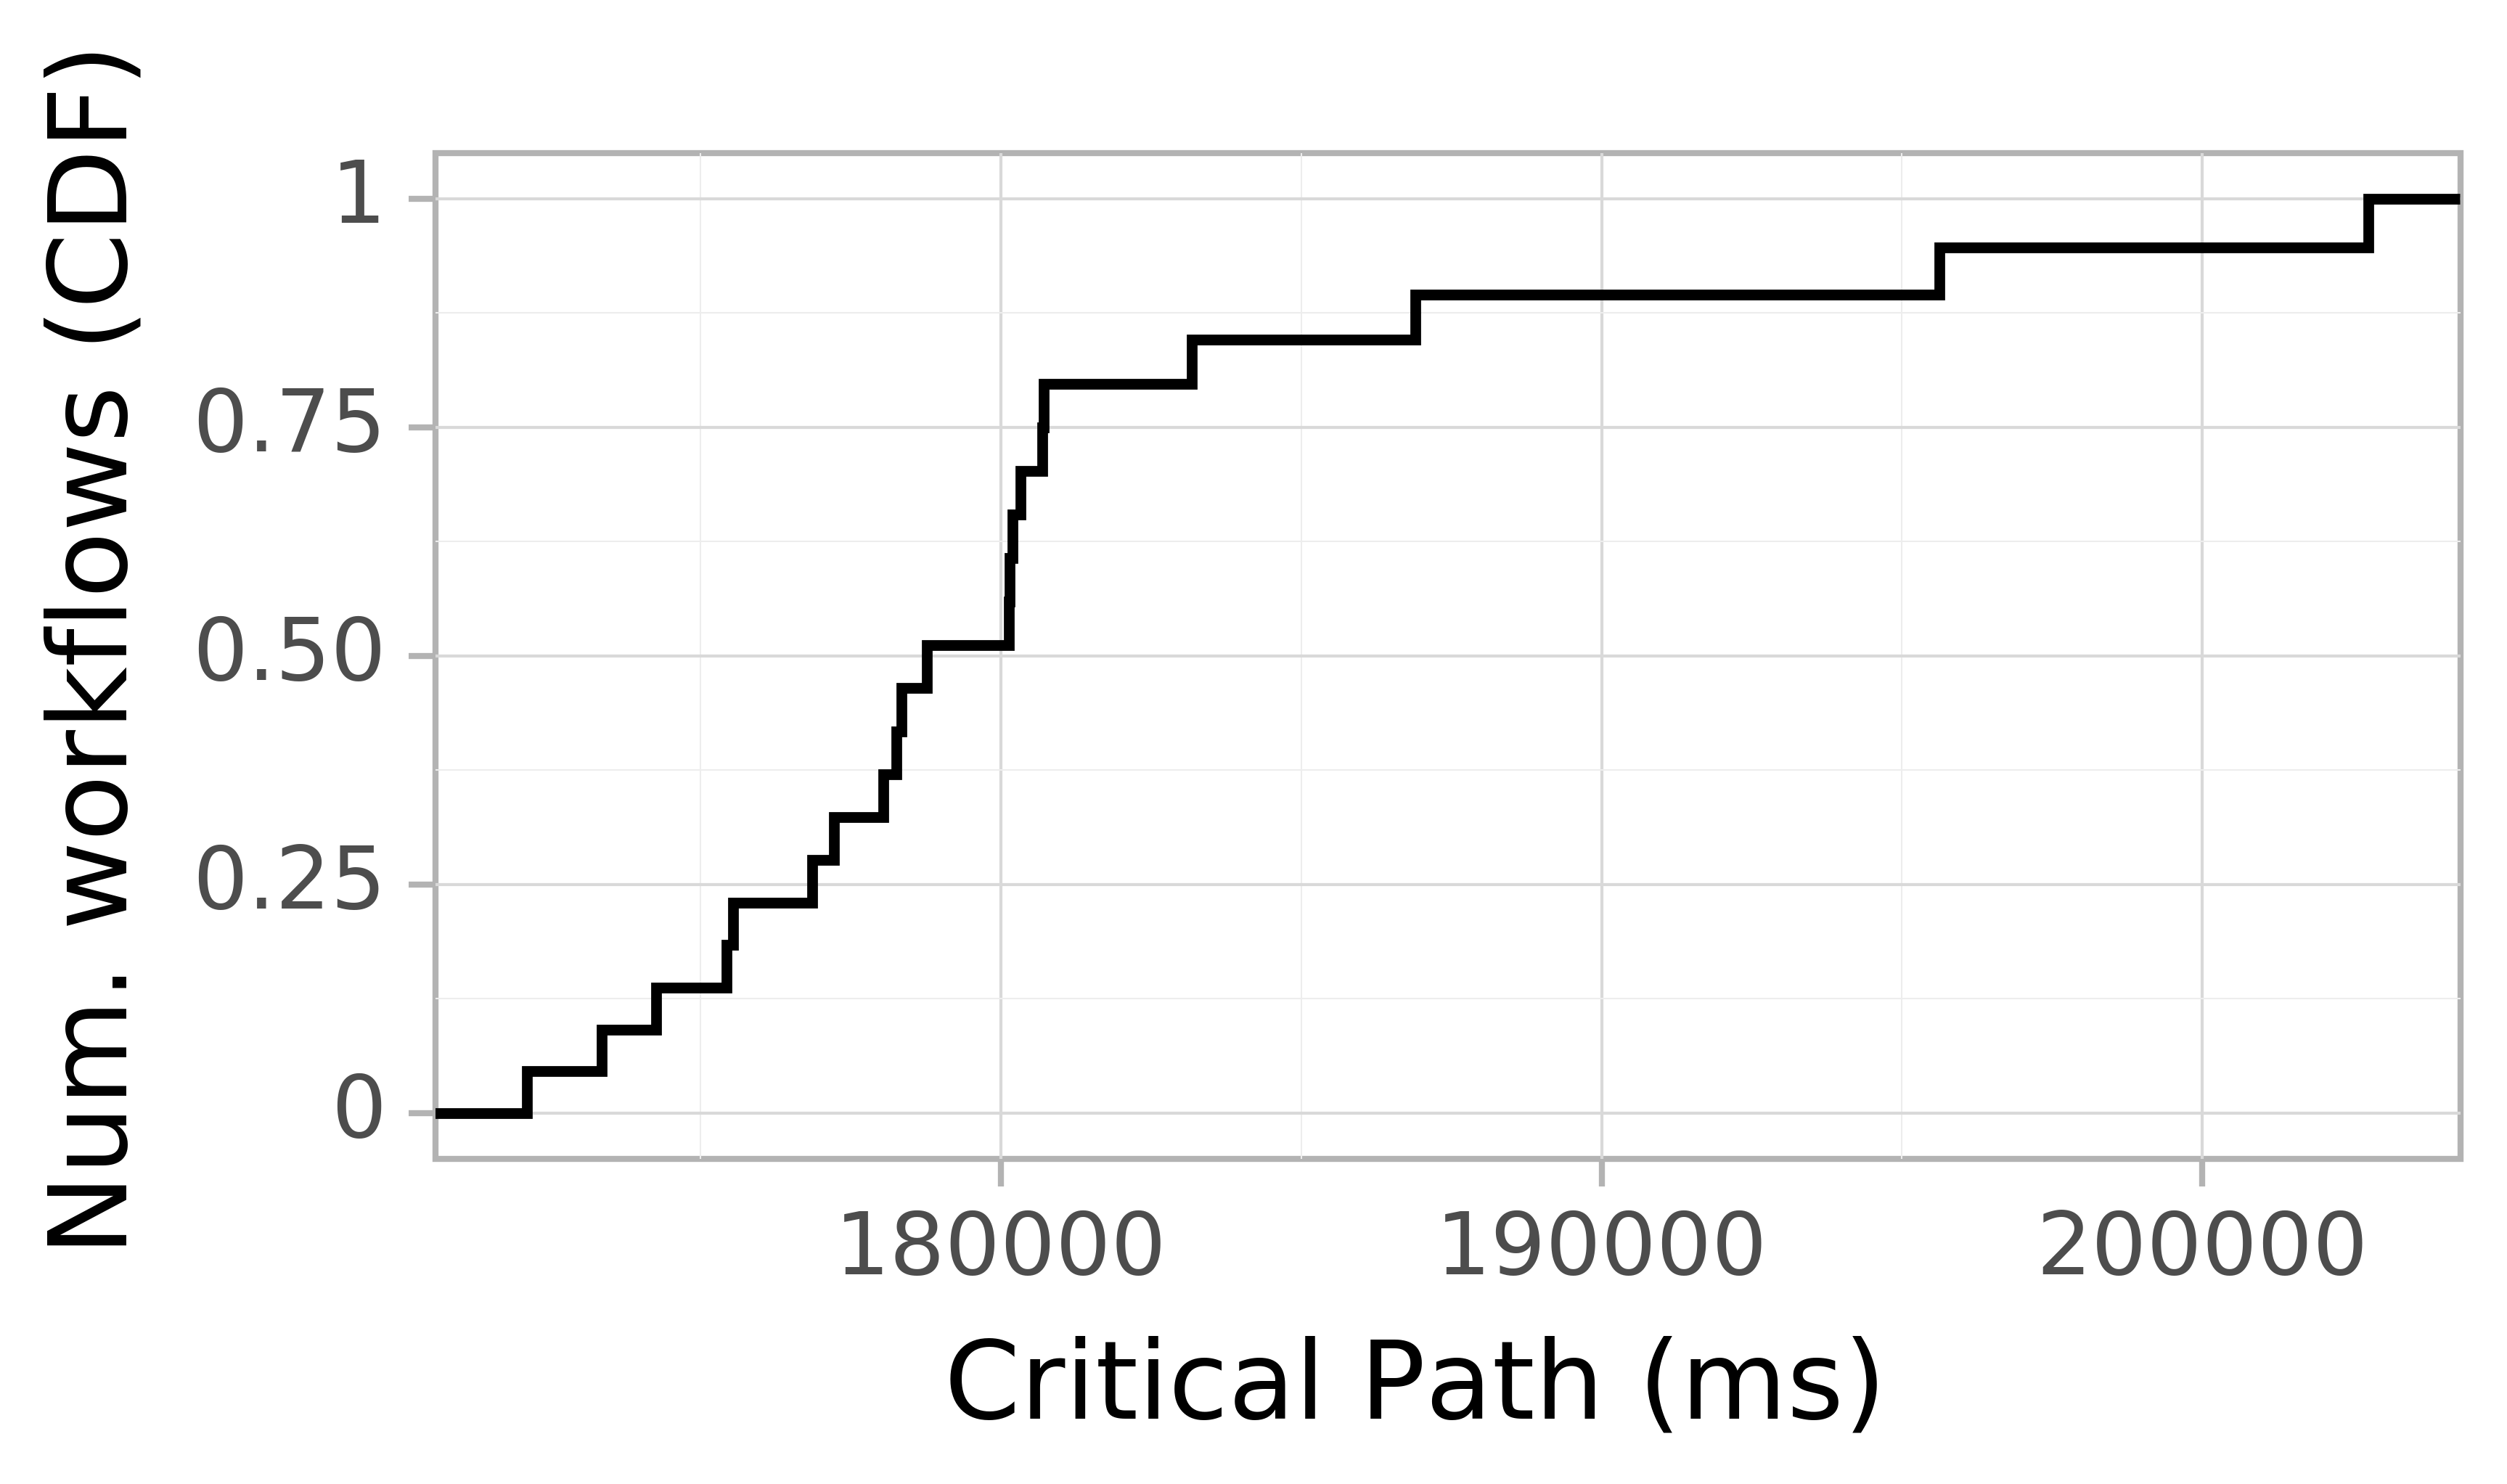 Job runtime CDF graph for the askalon-new_ee60 trace.